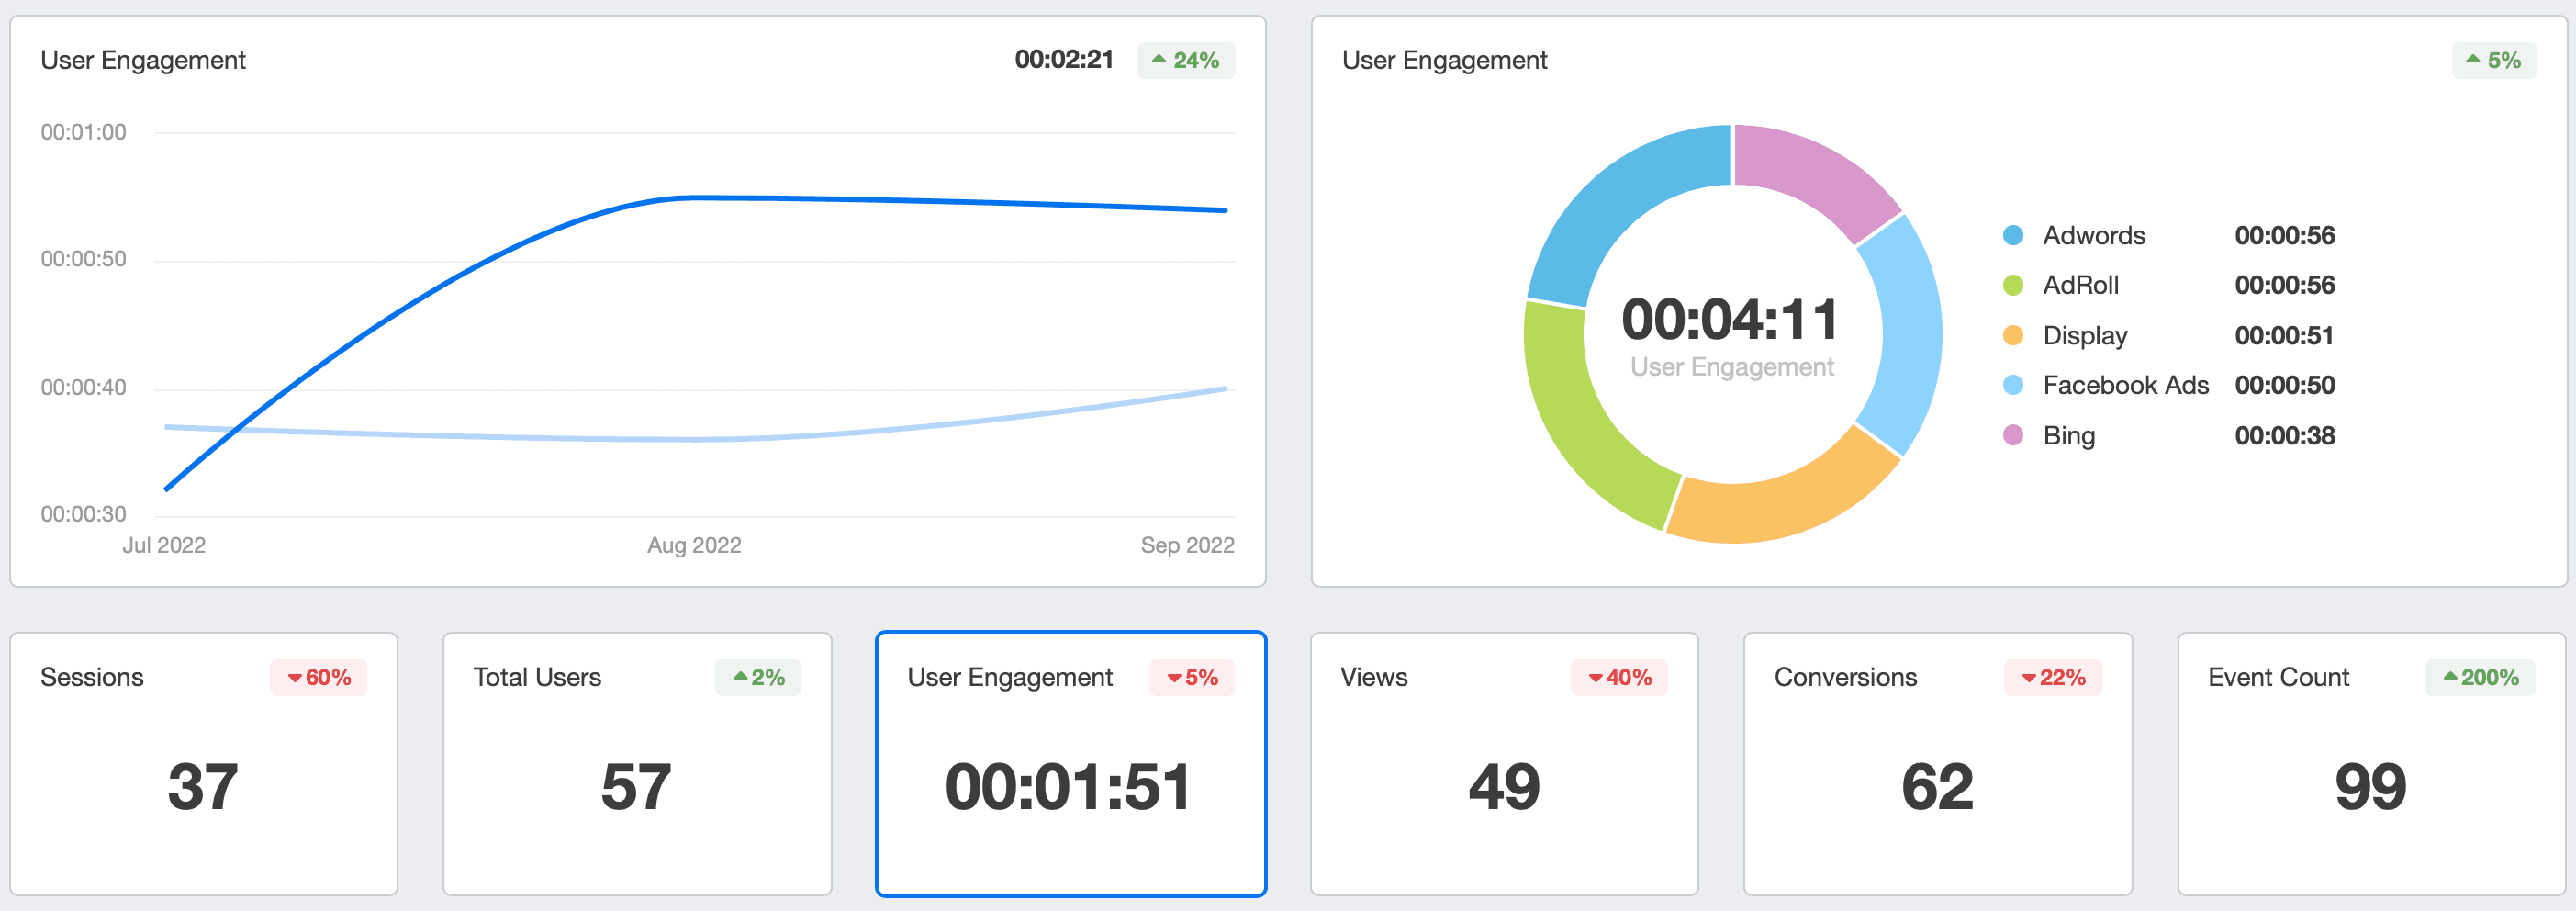 google analytics 4 engagement metrics visualized in a dashboard 